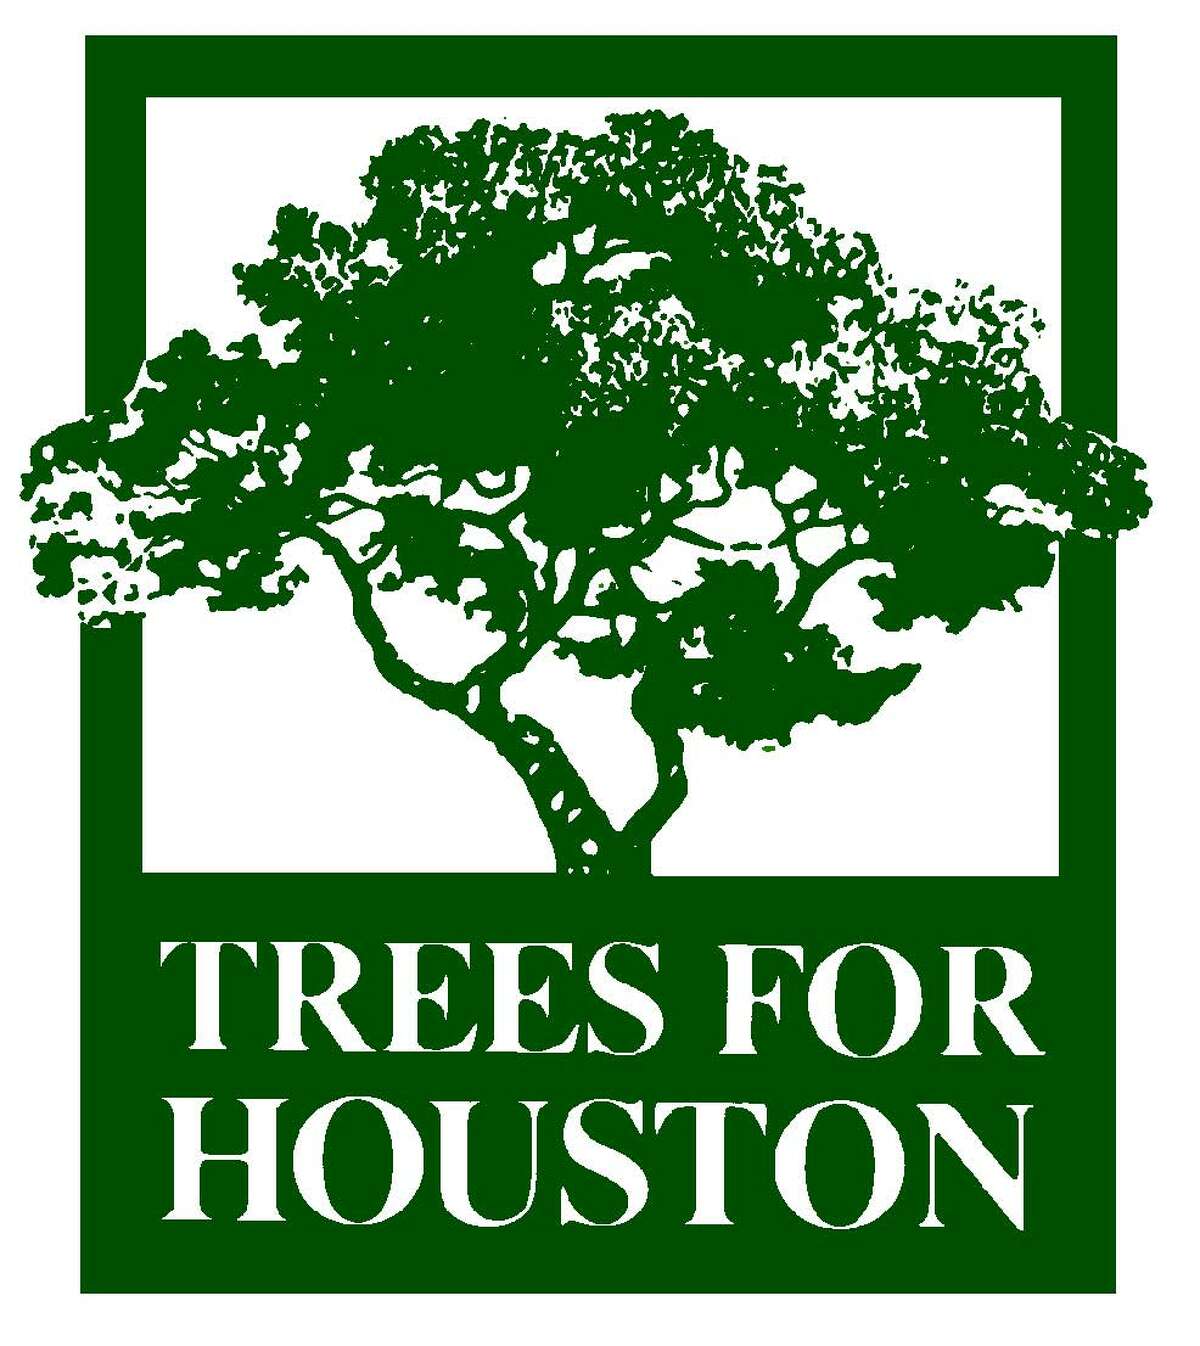 Trees for Houston helping keep the city green